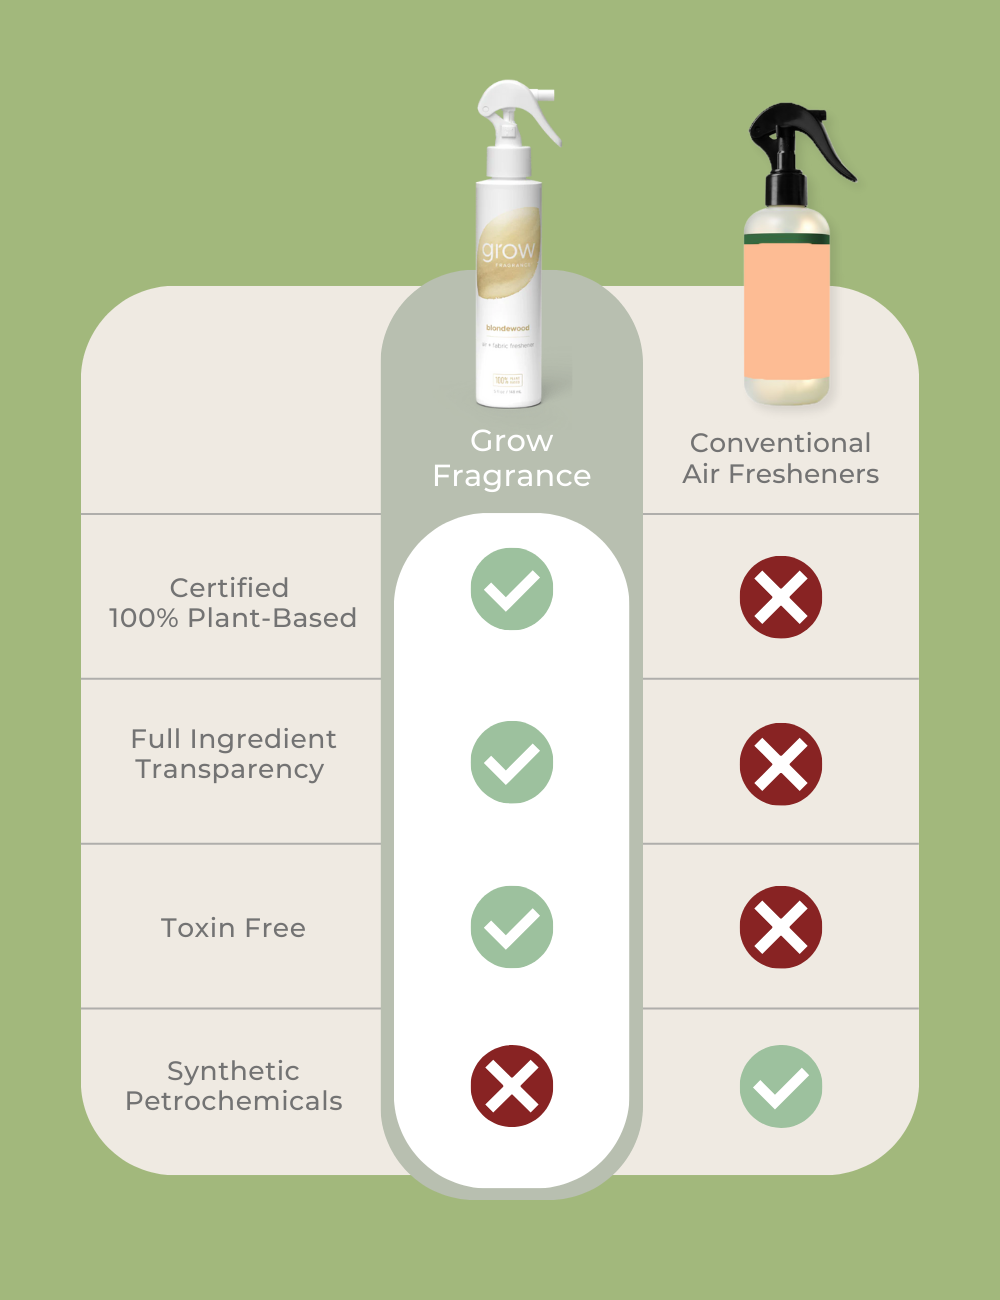 Choose wellness with our Grow Fragrance air fresheners, certified 100% plant-based and toxin-free, as shown in our comparison graphic. Unlike conventional air fresheners that rely on synthetic petrochemicals, our products promise full ingredient transparency for a safer, healthier home. This informative visual highlights the clear advantages of choosing Grow Fragrance, marking it as the smarter, greener choice for conscious consumers.